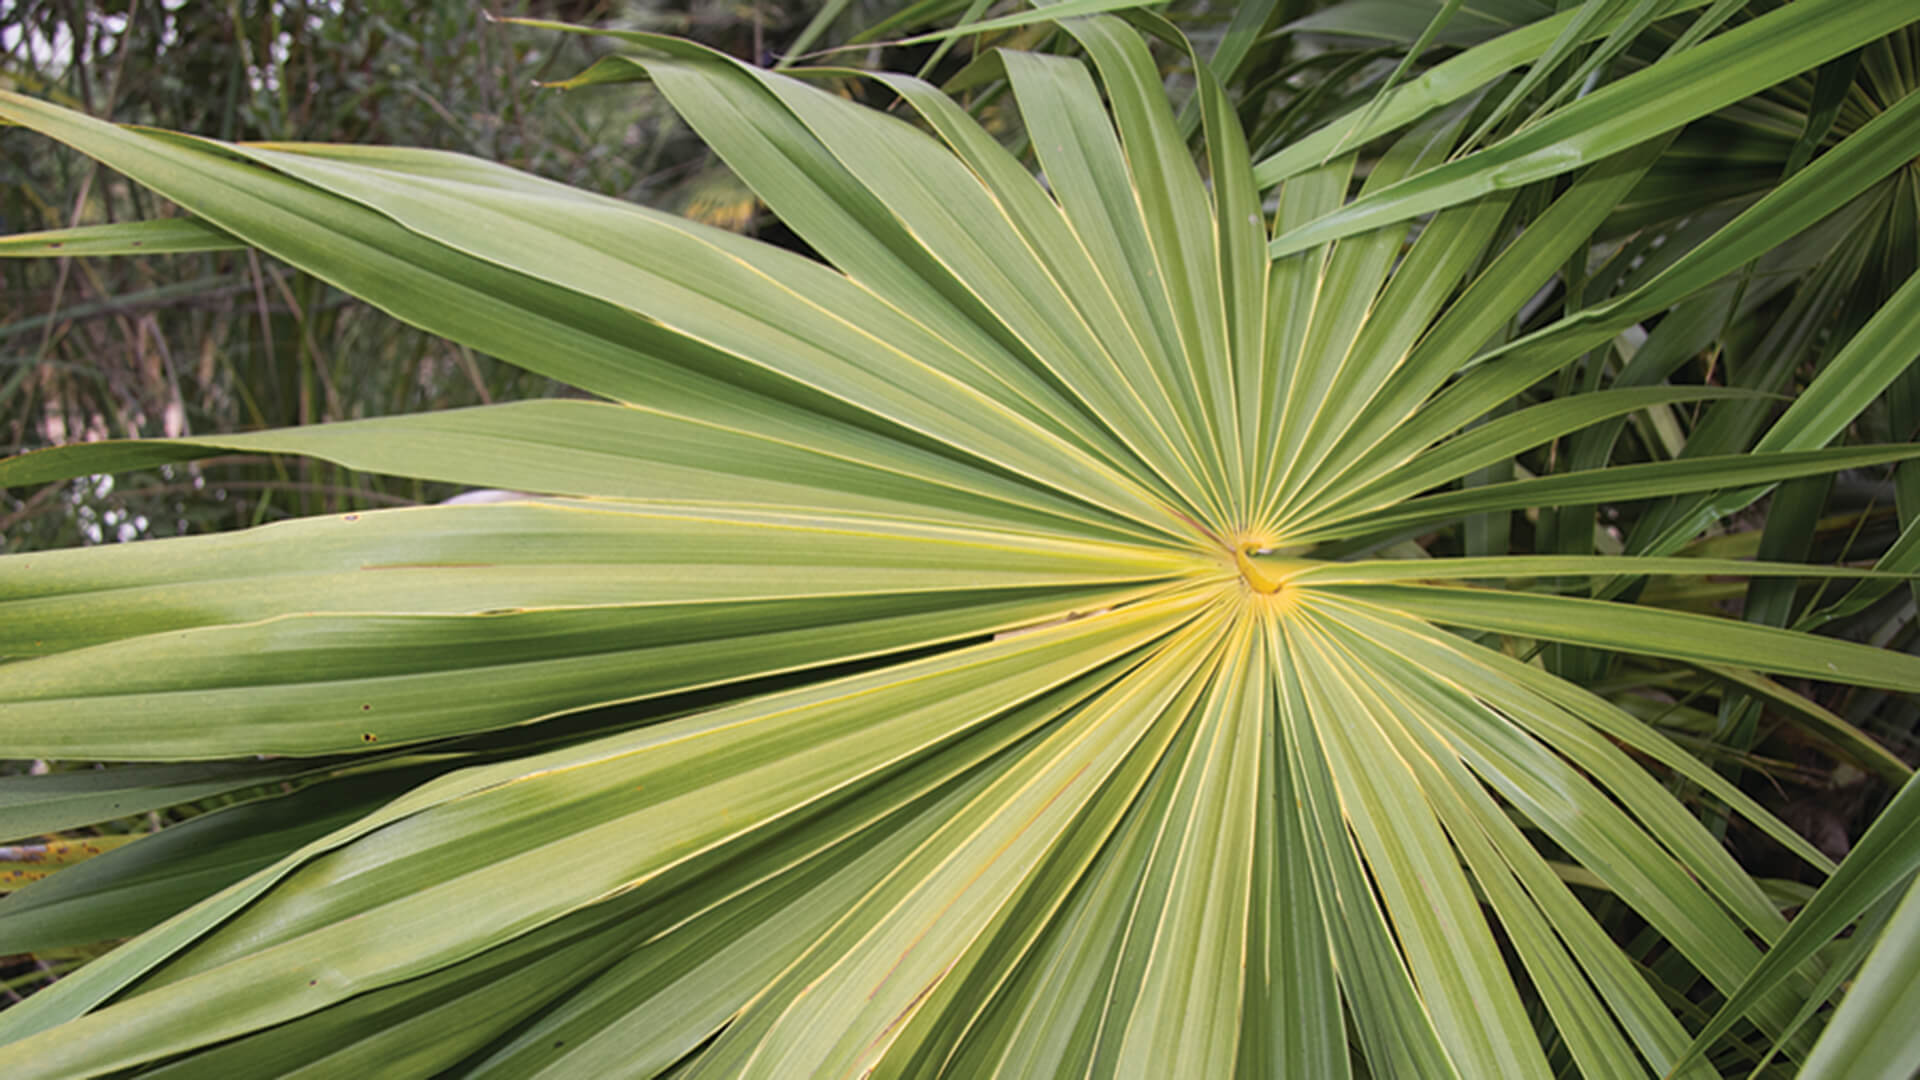 Close up of a fan palm frond.